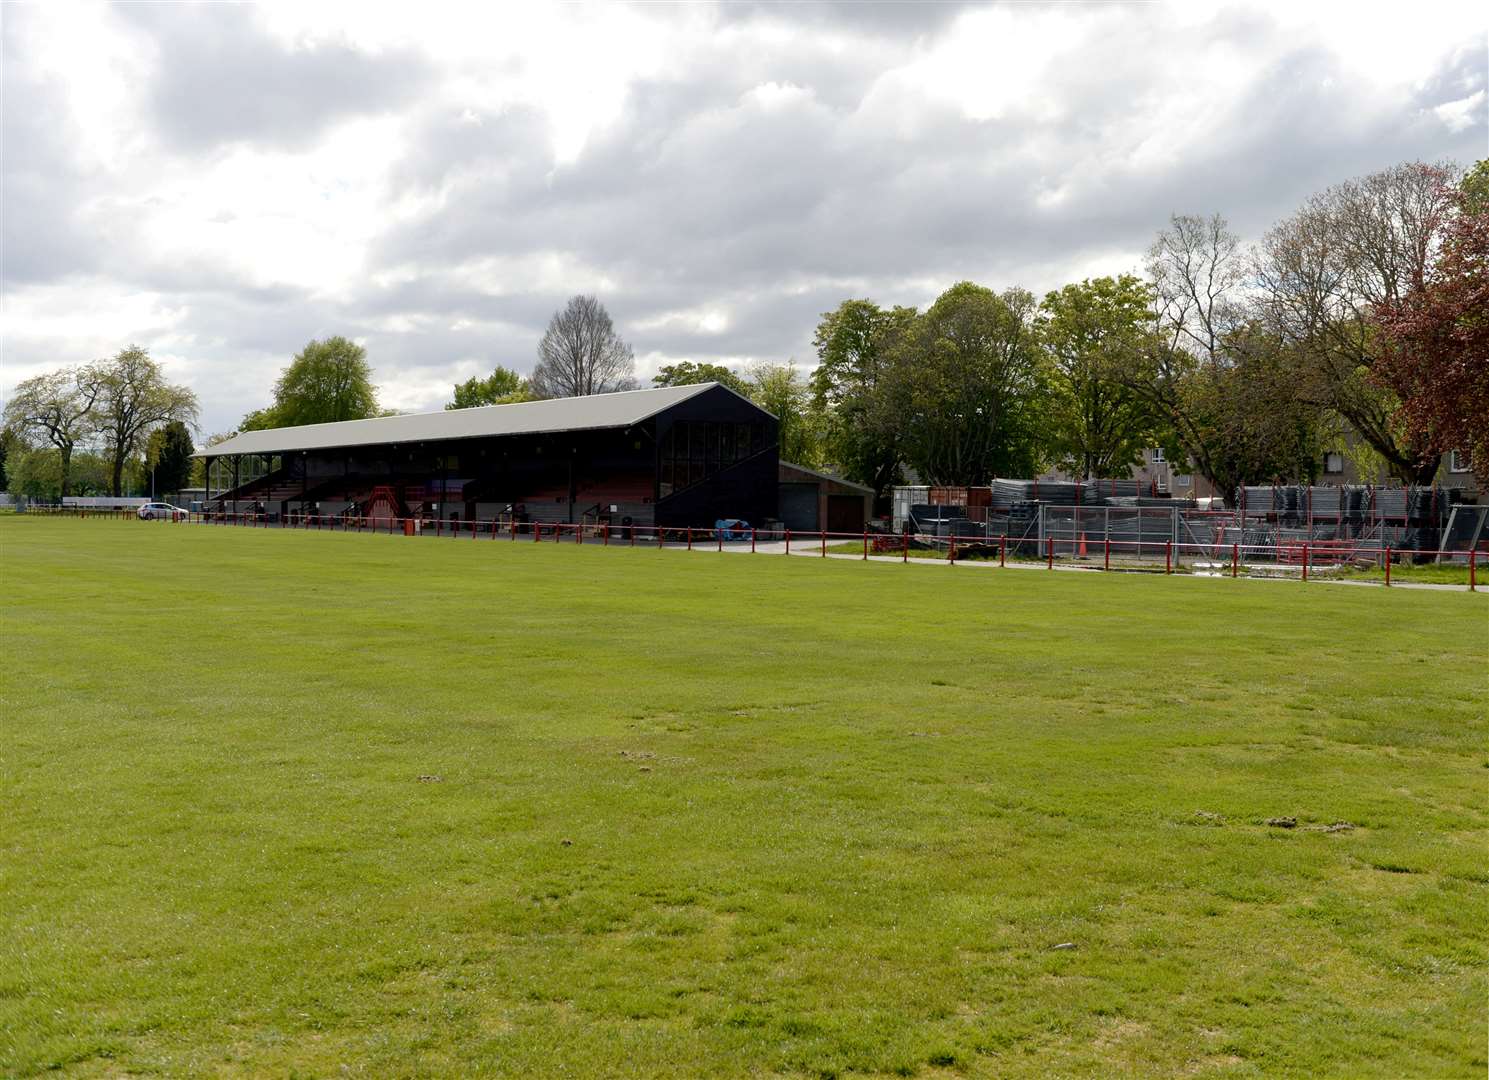 Plans for Bught Park Stadium include a refurbished grandstand and interactive museum of shinty.